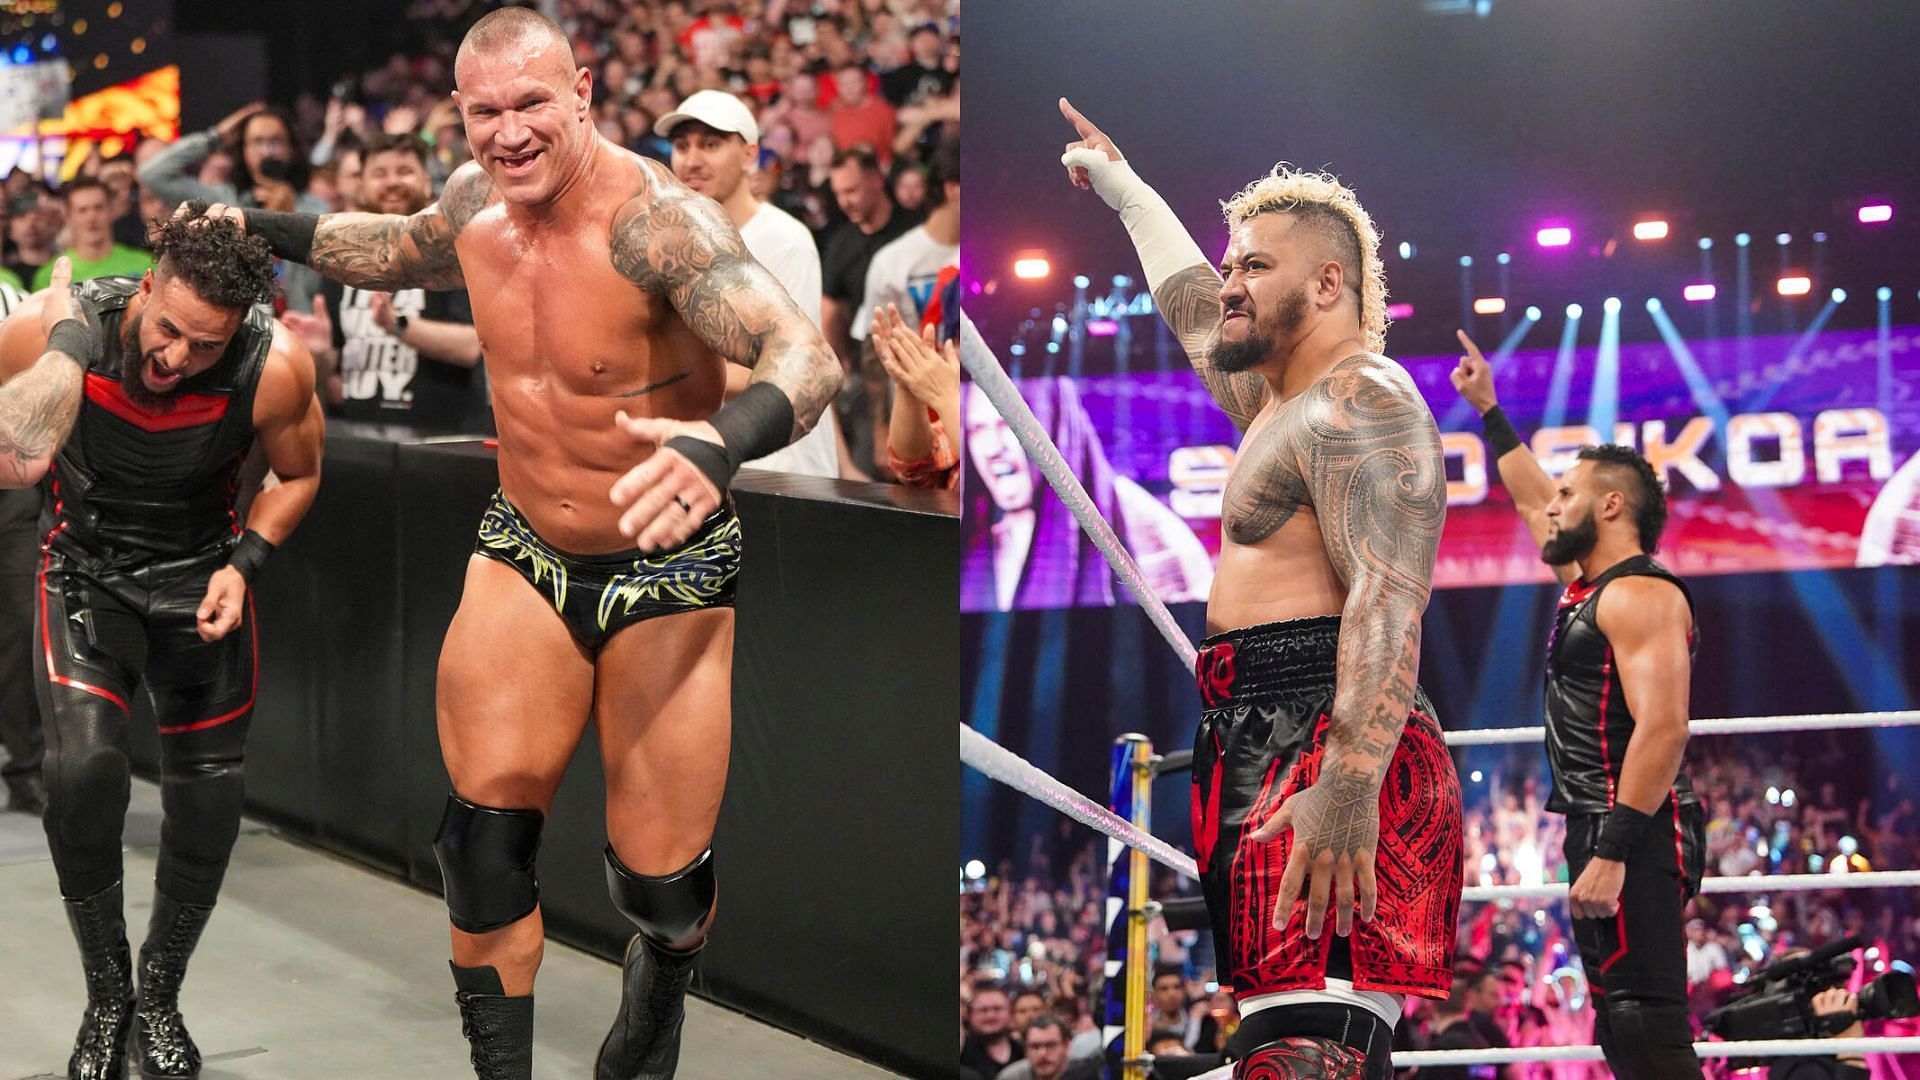 Randy Orton and Kevin Owens lost to The Bloodline at WWE Backlash